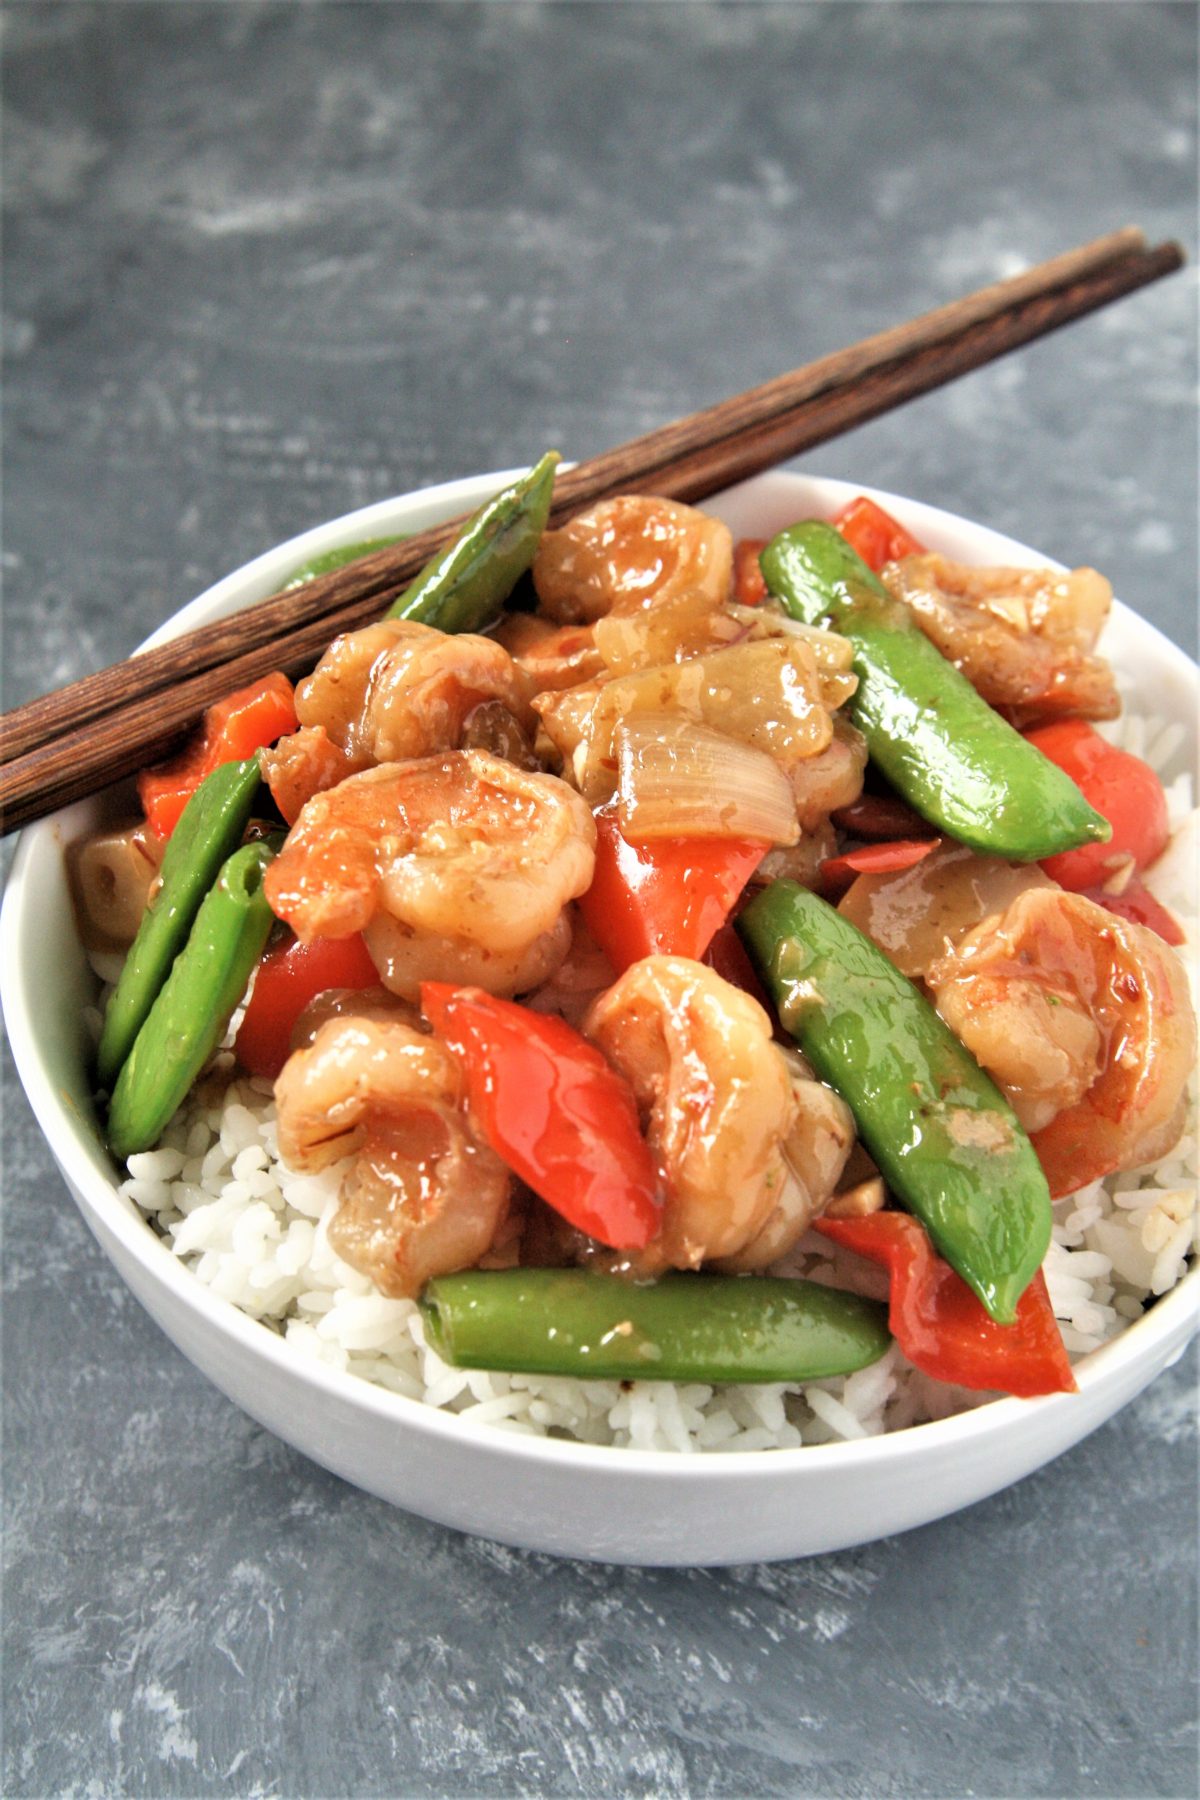 Tender shrimp wok fried in a sweet and spicy sauce with fresh veggies, this Panda Express Copycat Wok-Fried Shrimp recipe is going to quickly become your favorite go-to easy dinner! Serve over rice for a perfect weeknight meal.